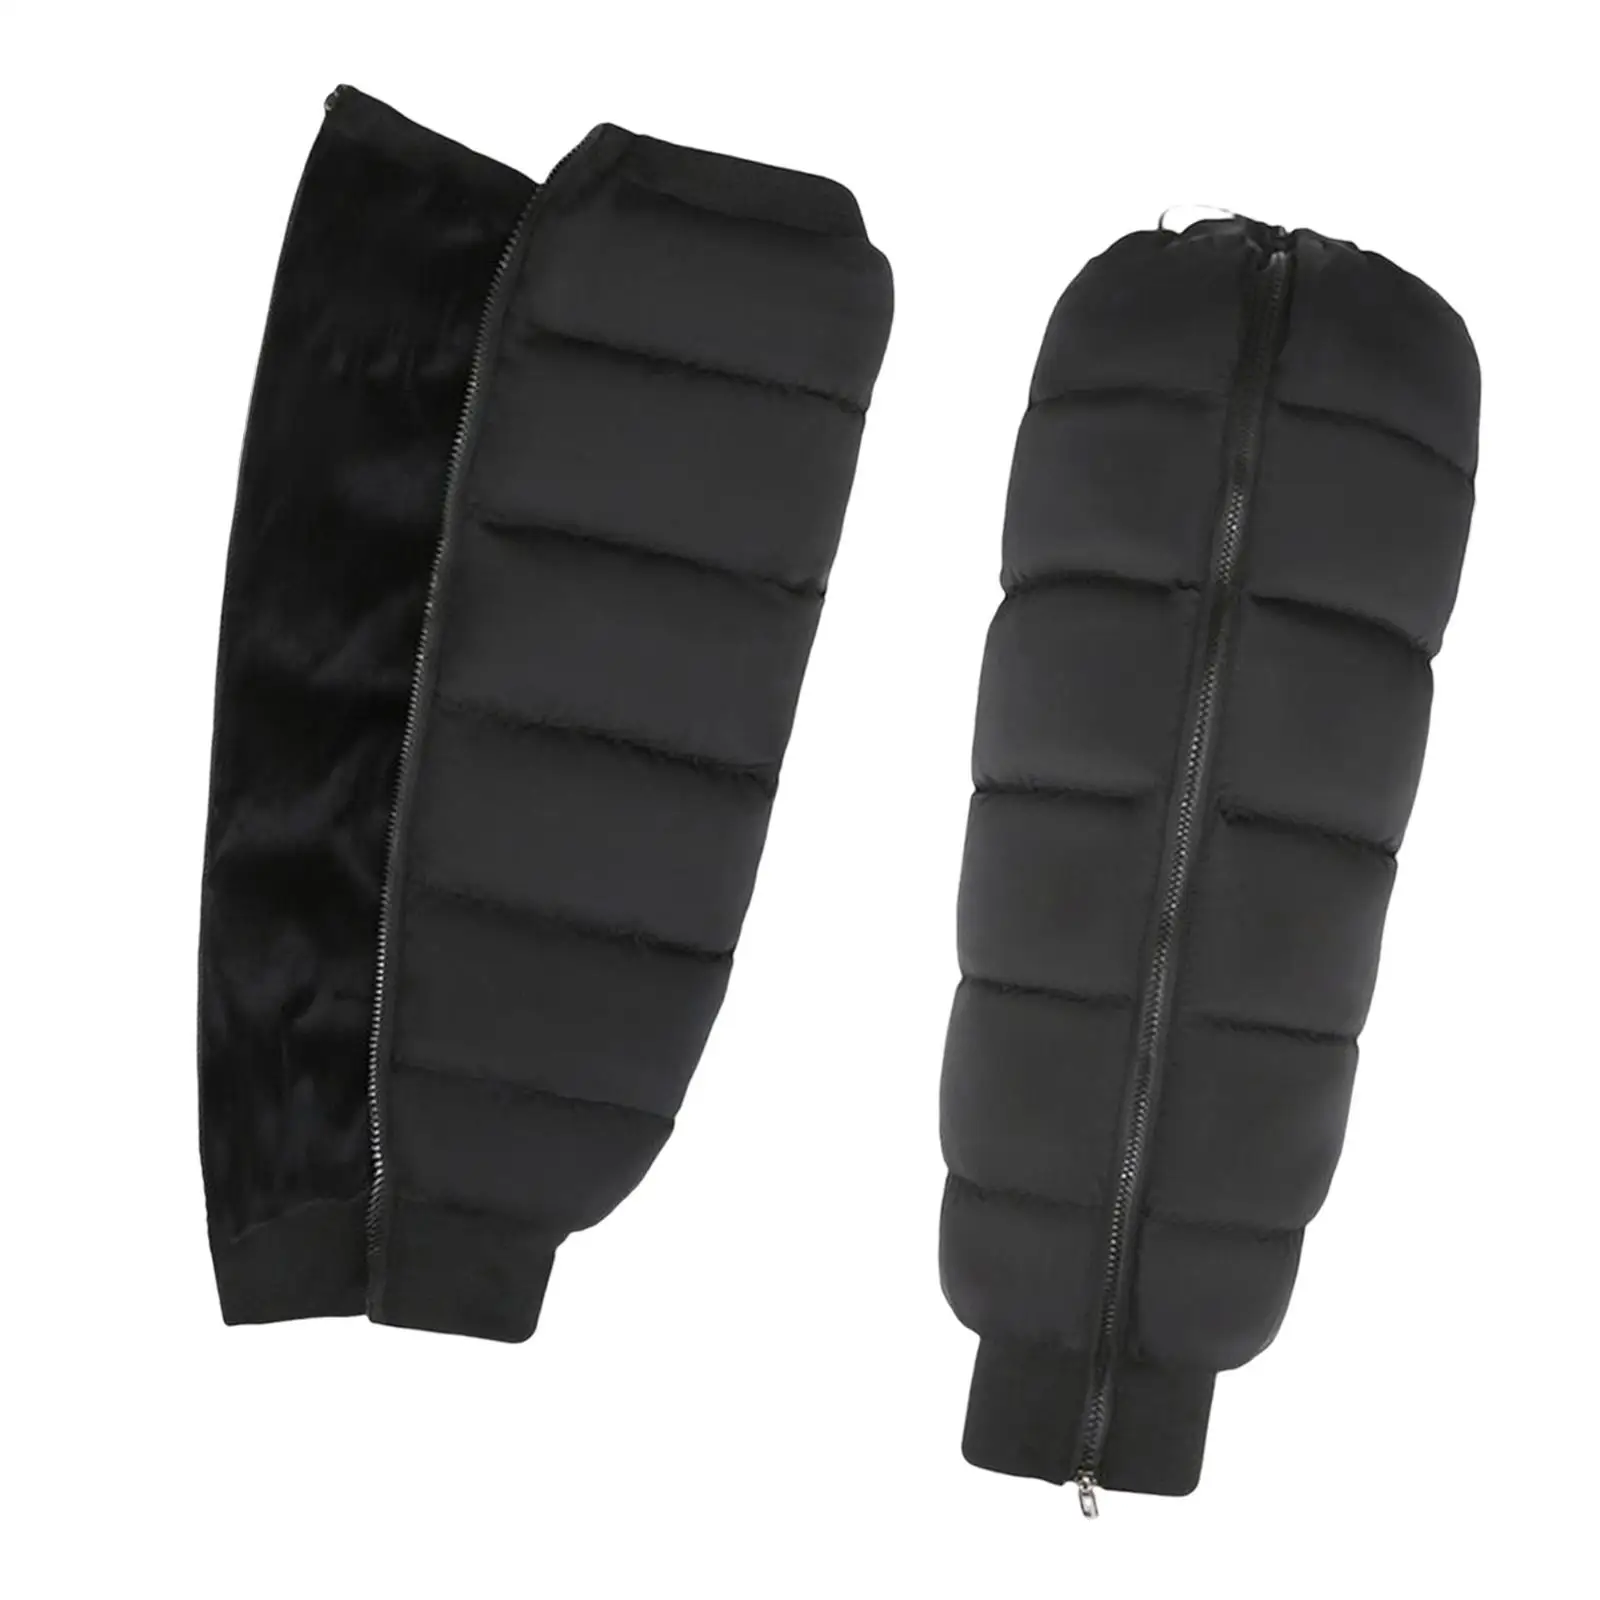 1 Pair Motorcycle Knee Pads Leggings Men and Women Windproof Black Protective Gear for Winter